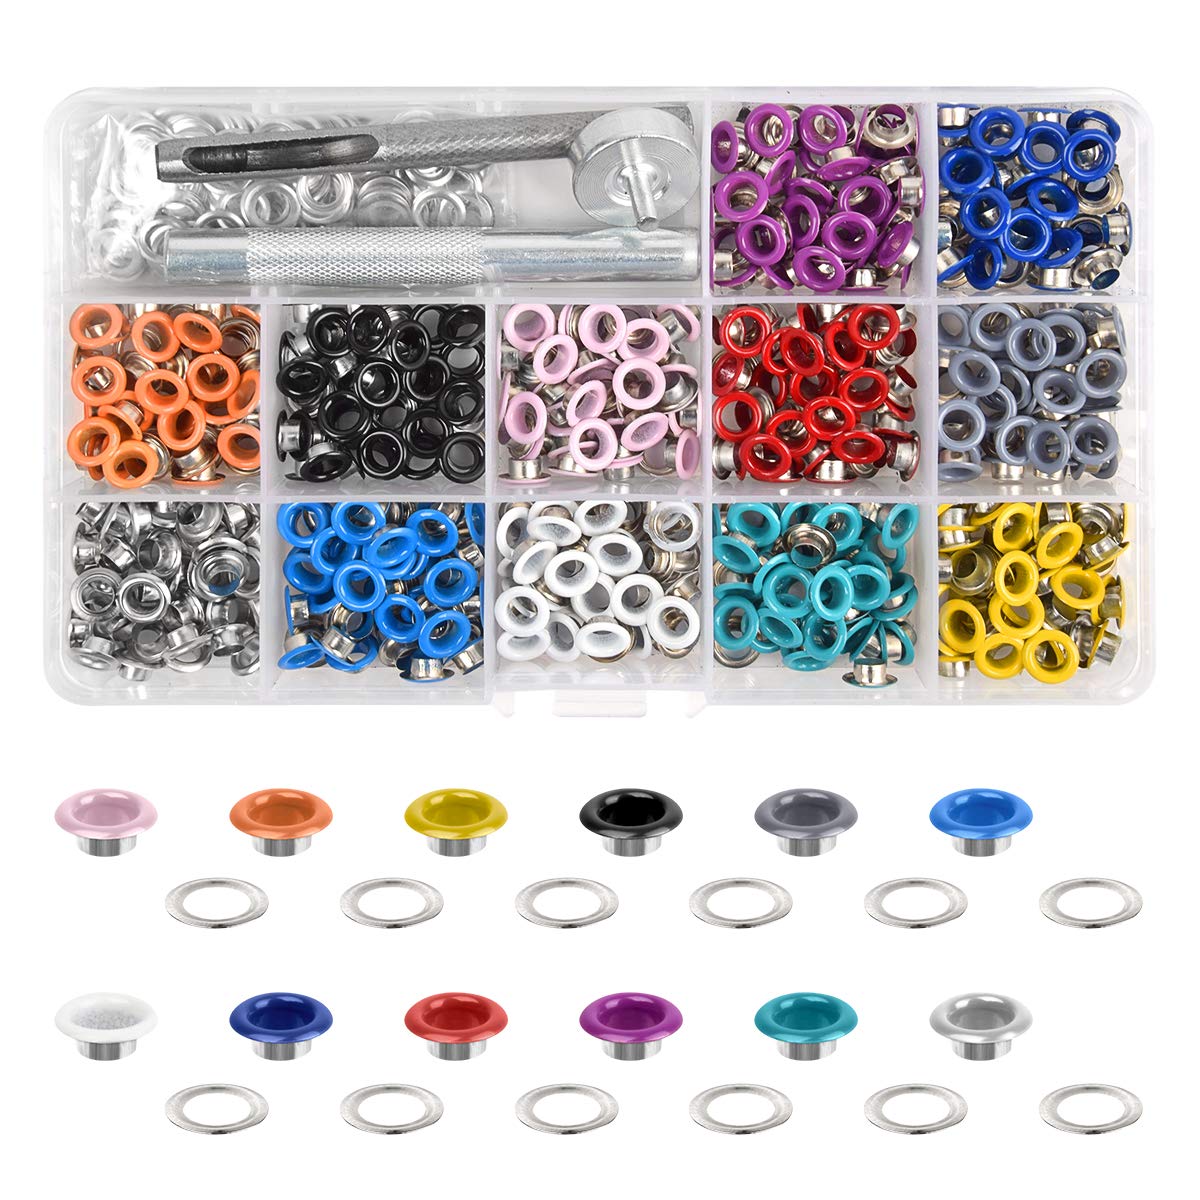 Laviesto Grommet Kit, 540 Sets 3/16 Inch Multi-Color Metal Eyelets Grommets  Set with 3 Setting Tools for Clothes Shoes Bag Leather Crafts DIY  Projects(12 Colors)